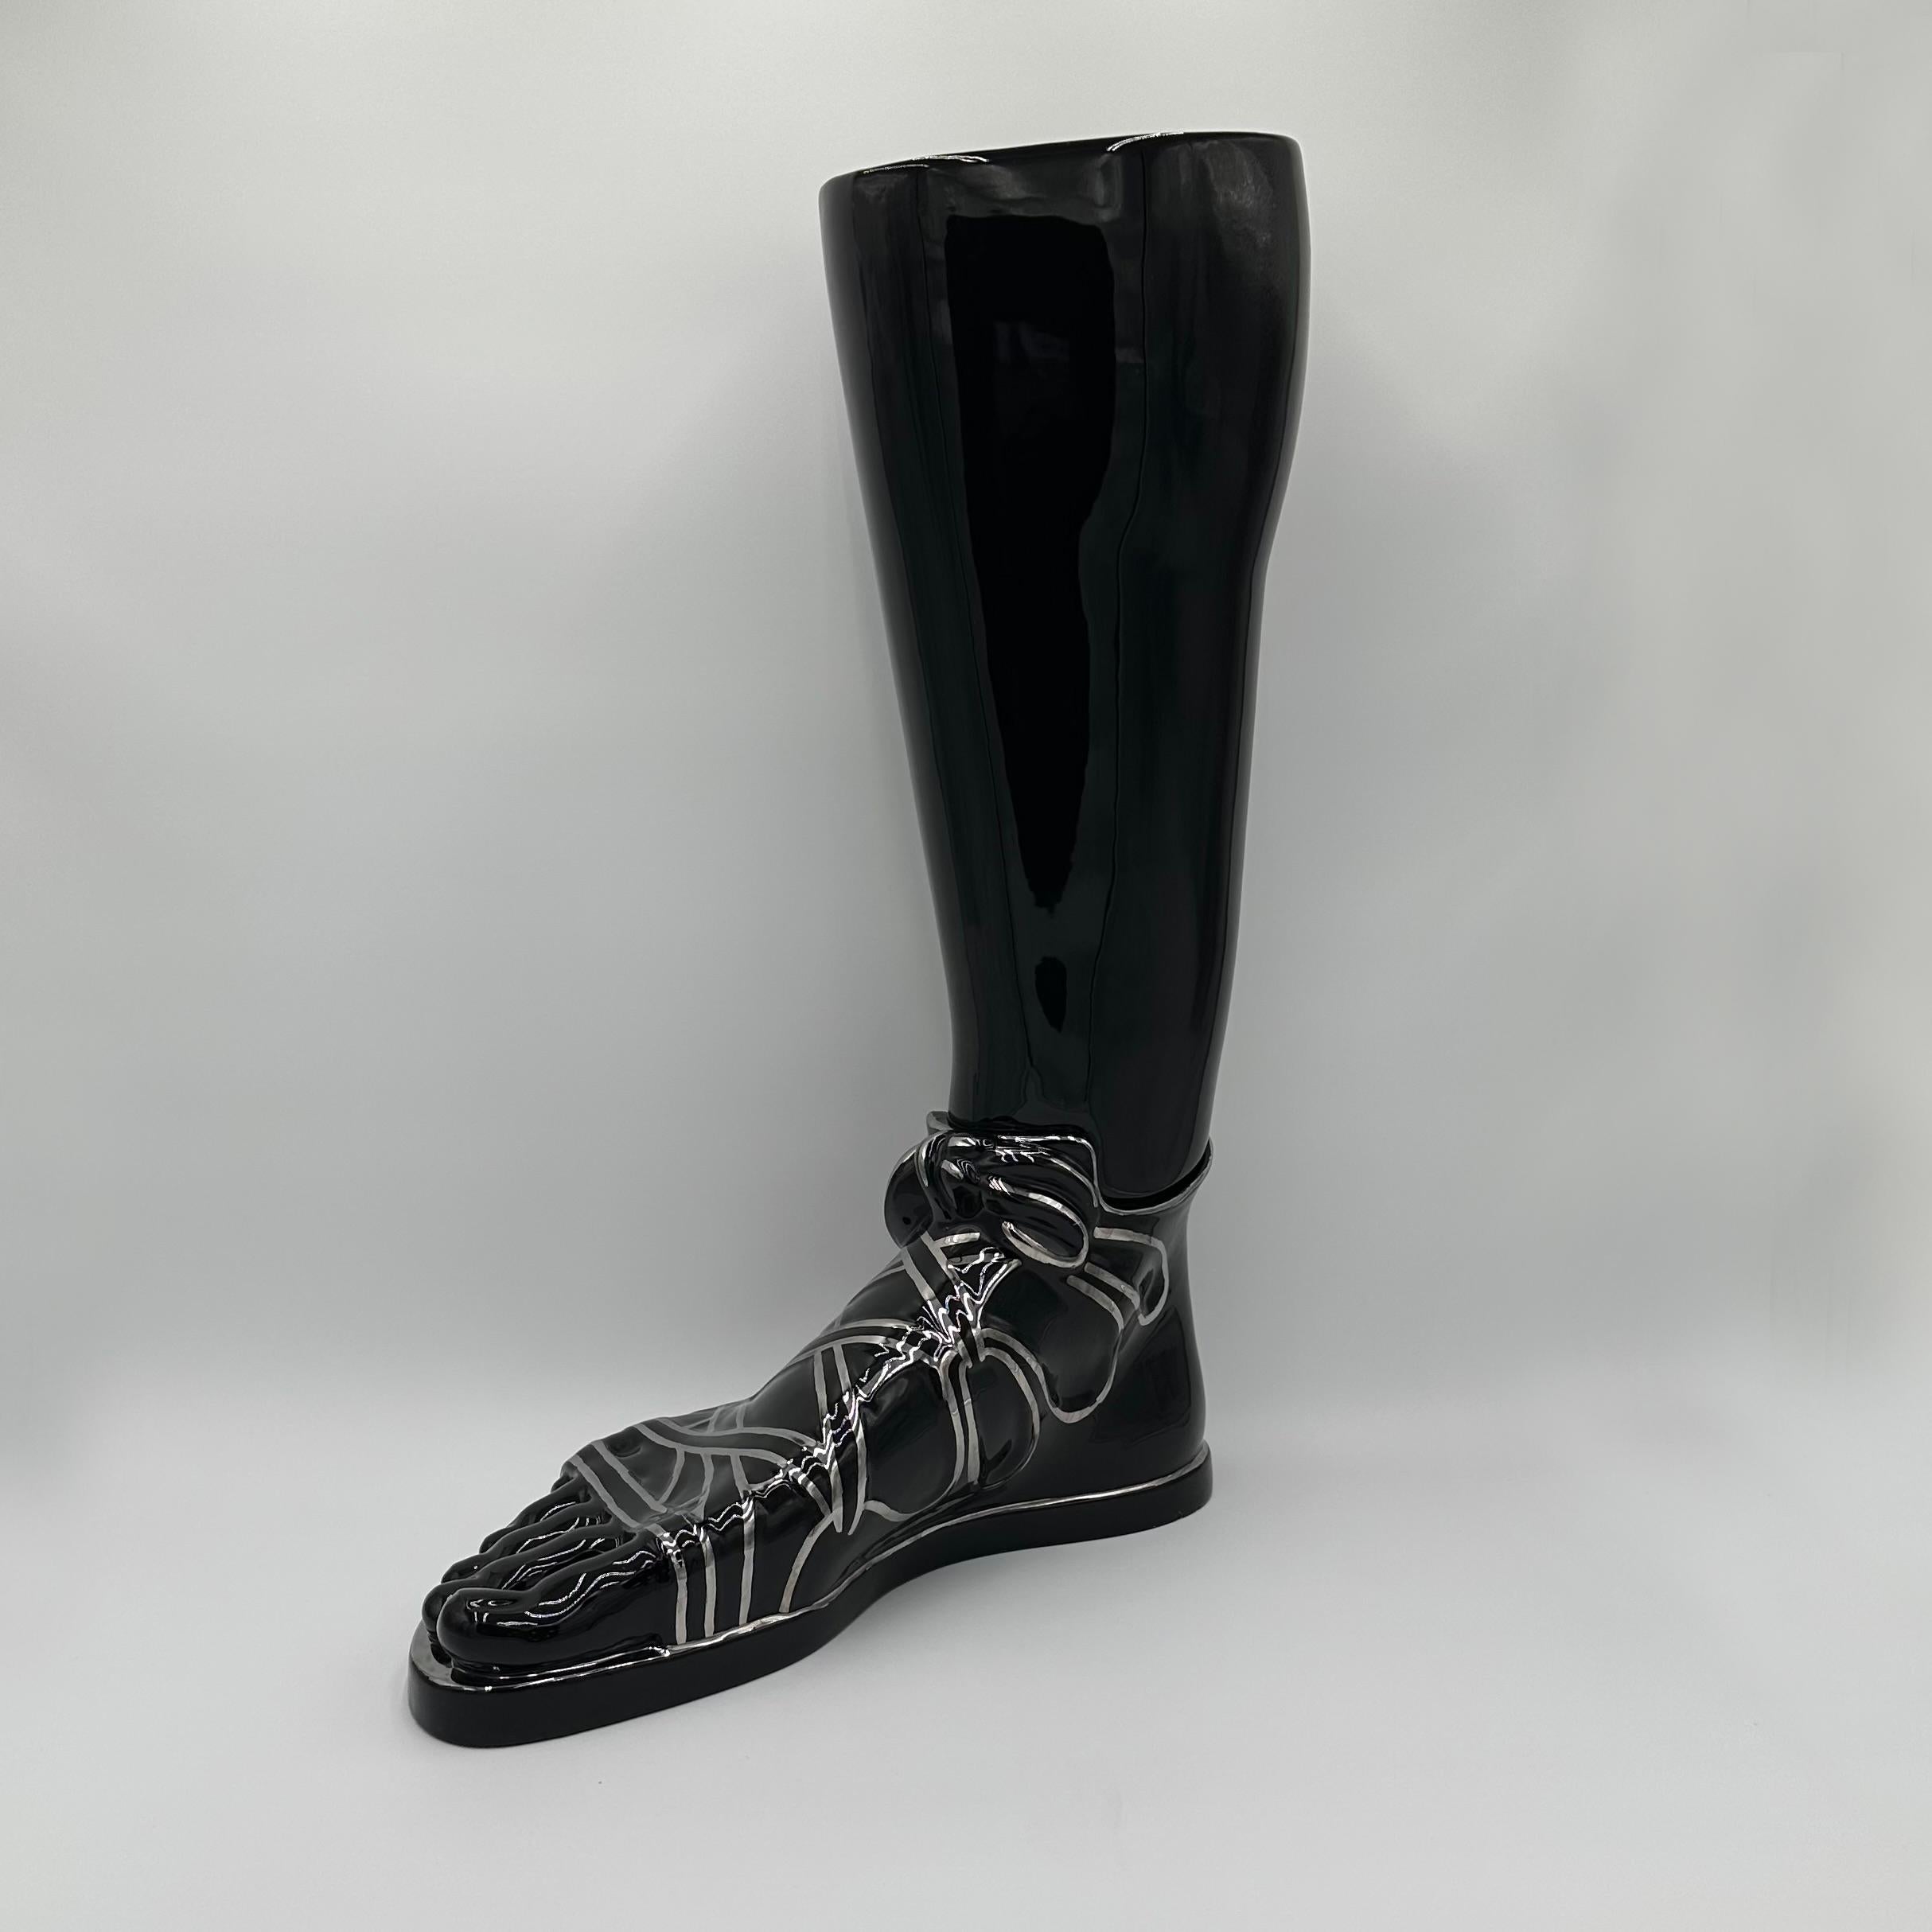 The Piero Fornasetti Stick or Umbrella Stand consists of a hollow glazed ceramic black leg and detailed foot, dressed in a Greco-Roman style sandal. The sandal is hand-painted in silver. This piece is rare and very collectible. 

Piero Fornasetti,